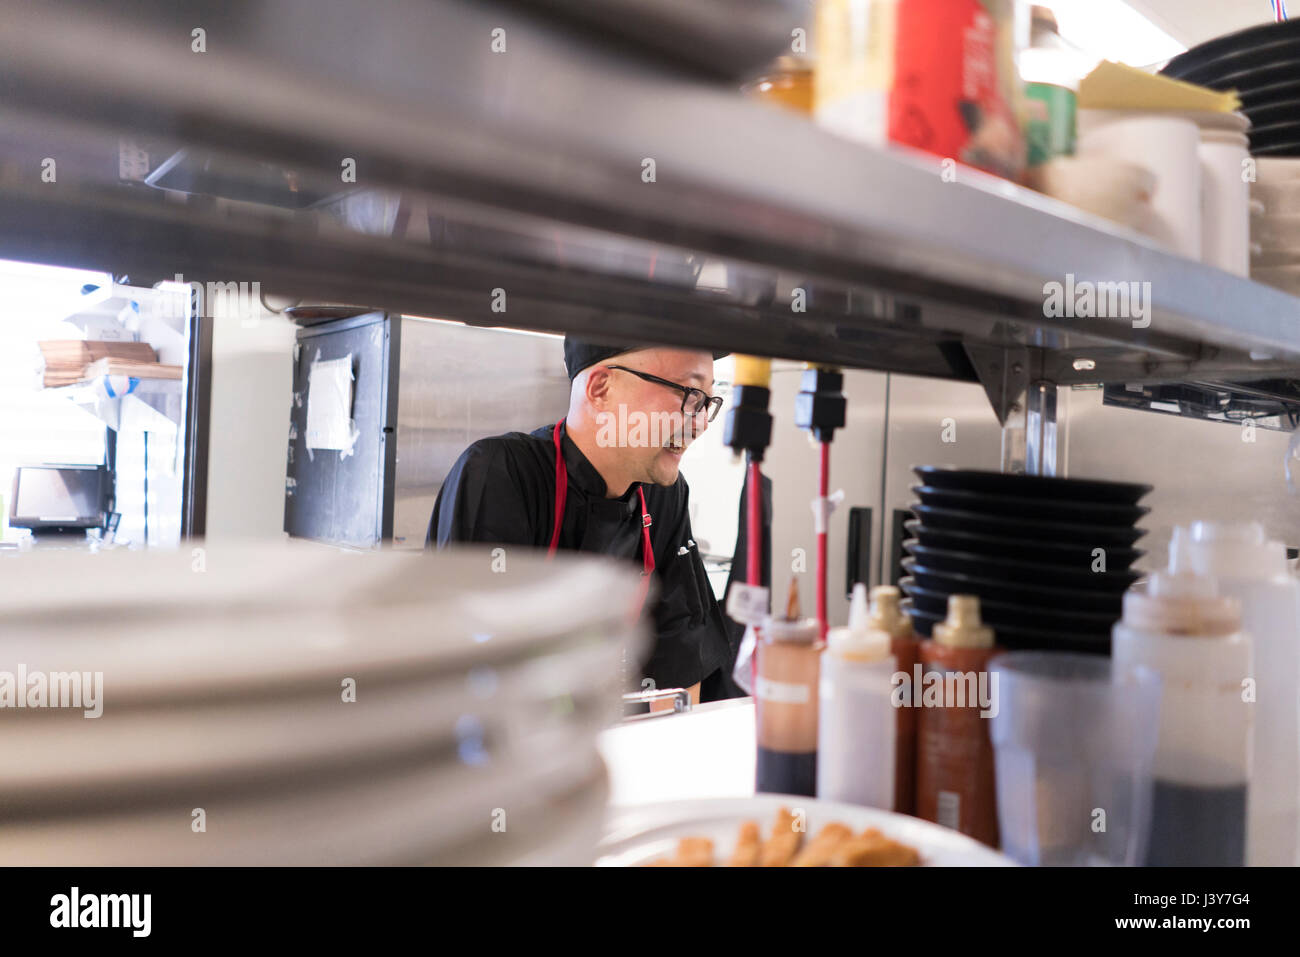 View through shelves of chef working in commercial kitchen Stock Photo